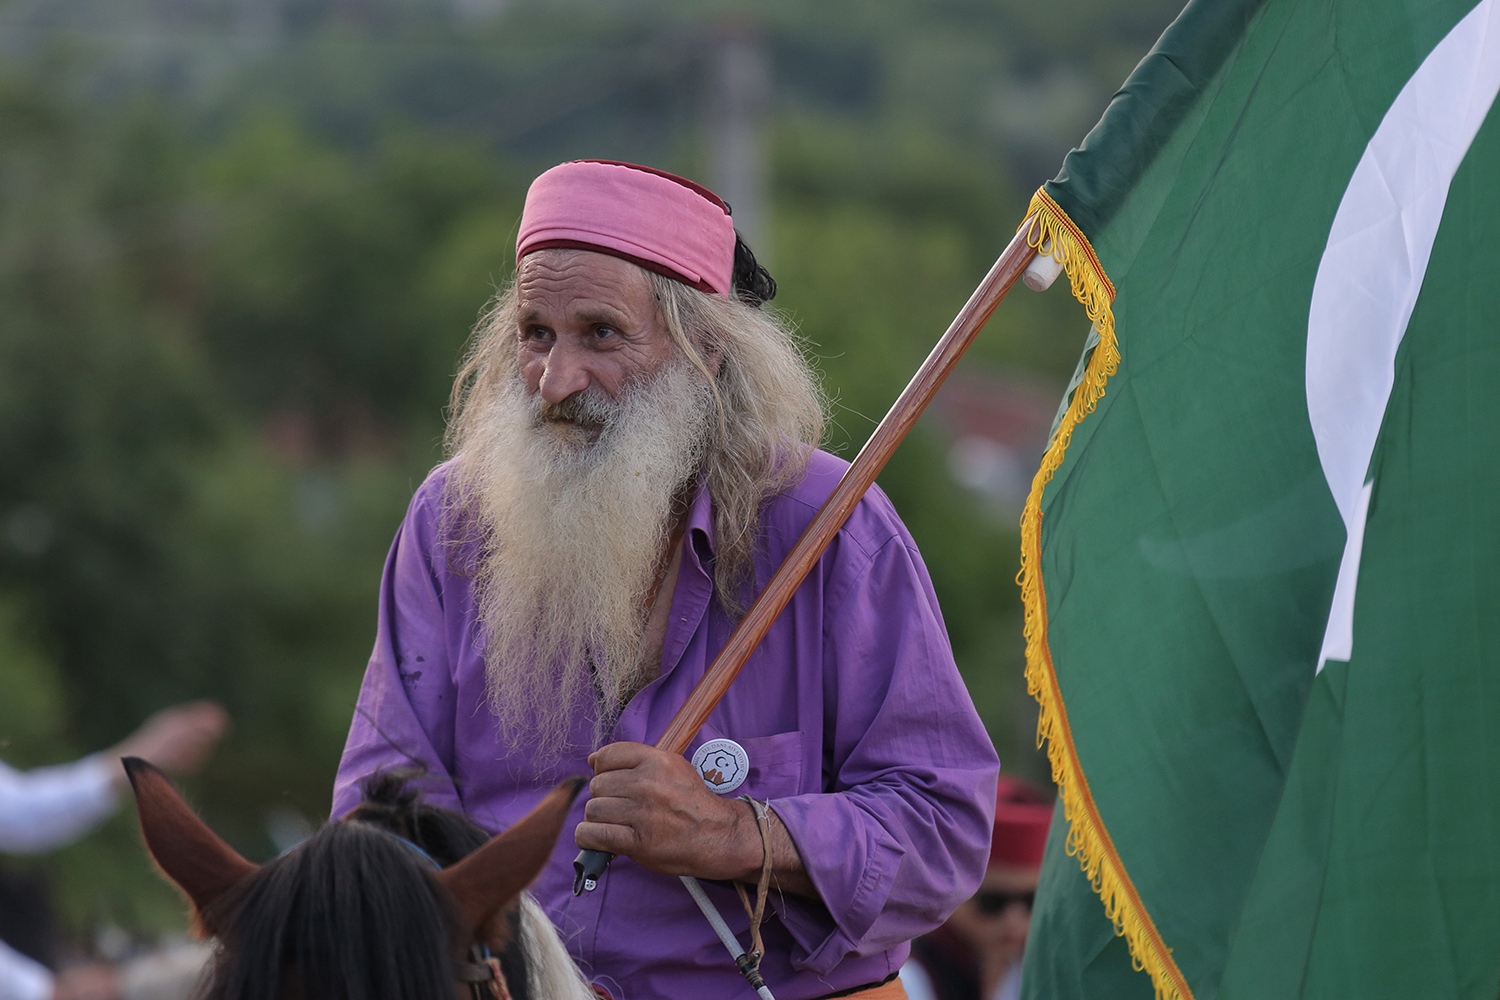 A white-haired, bearded man carrying a flag and wearing purple rides on horseback (photo: Konstantin Novakovic)